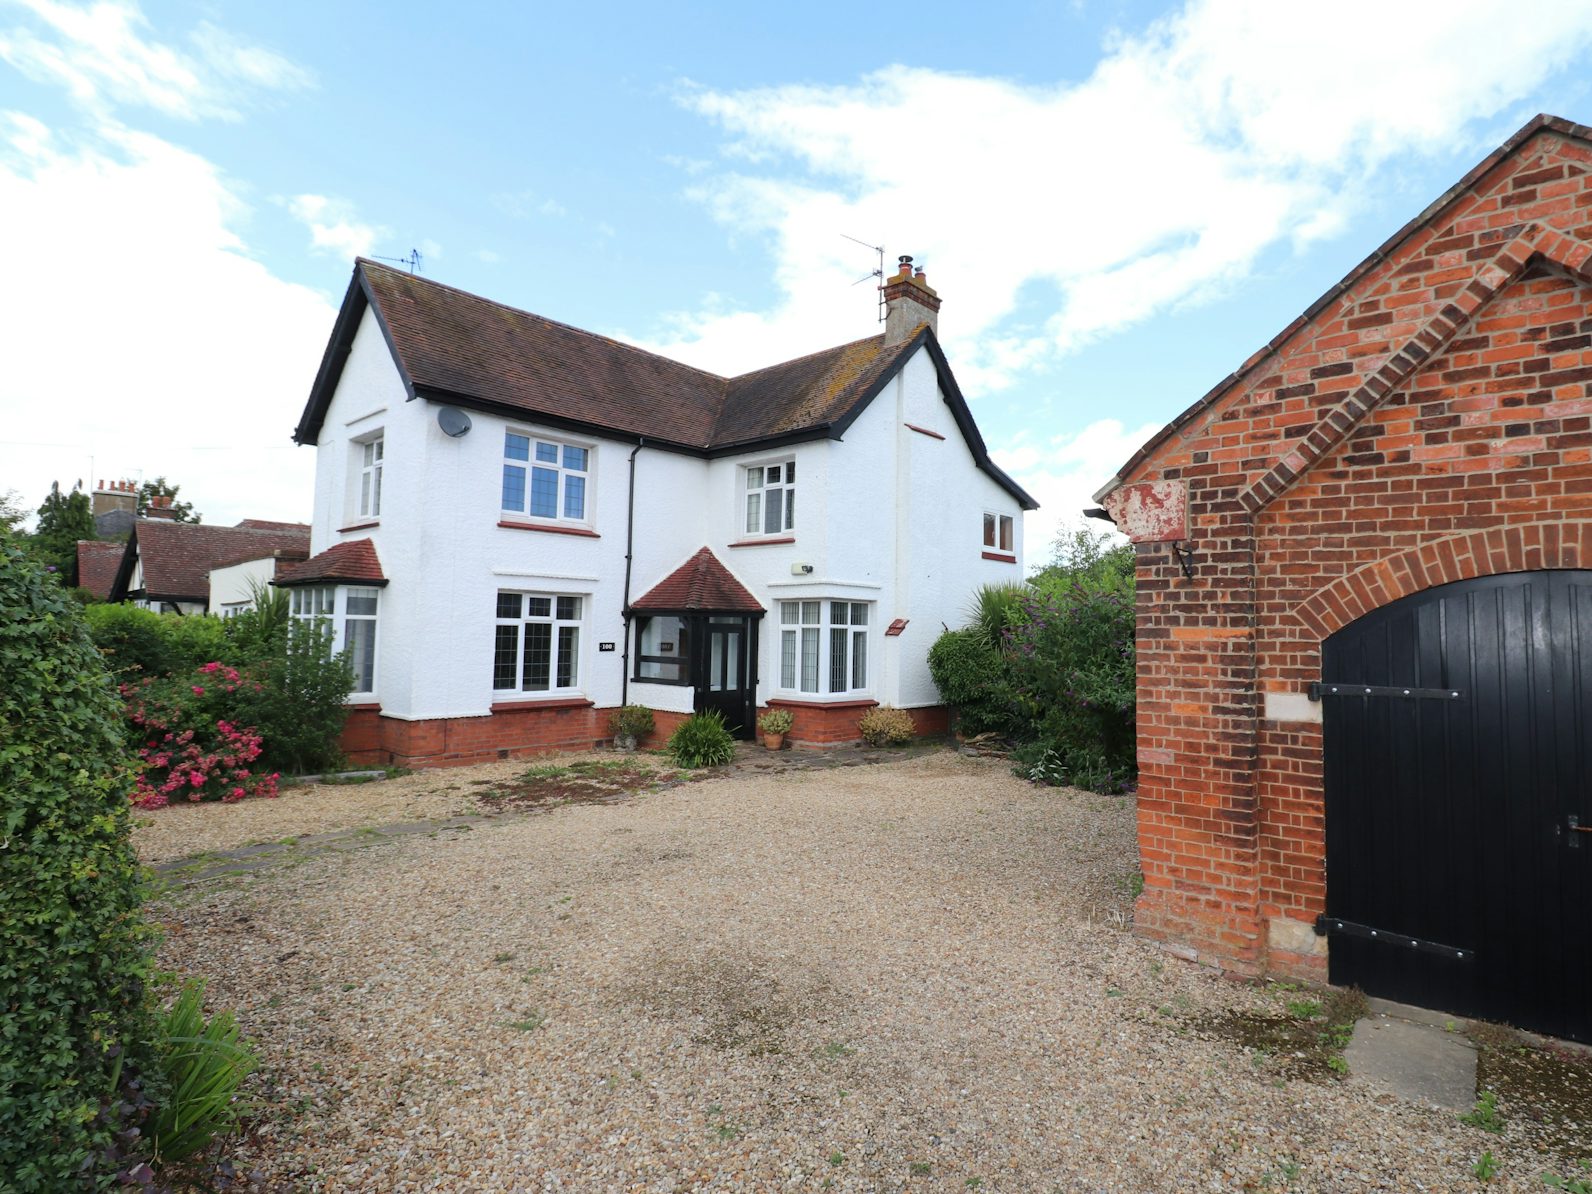 Detached House for sale on Pinchbeck Road Spalding, PE11